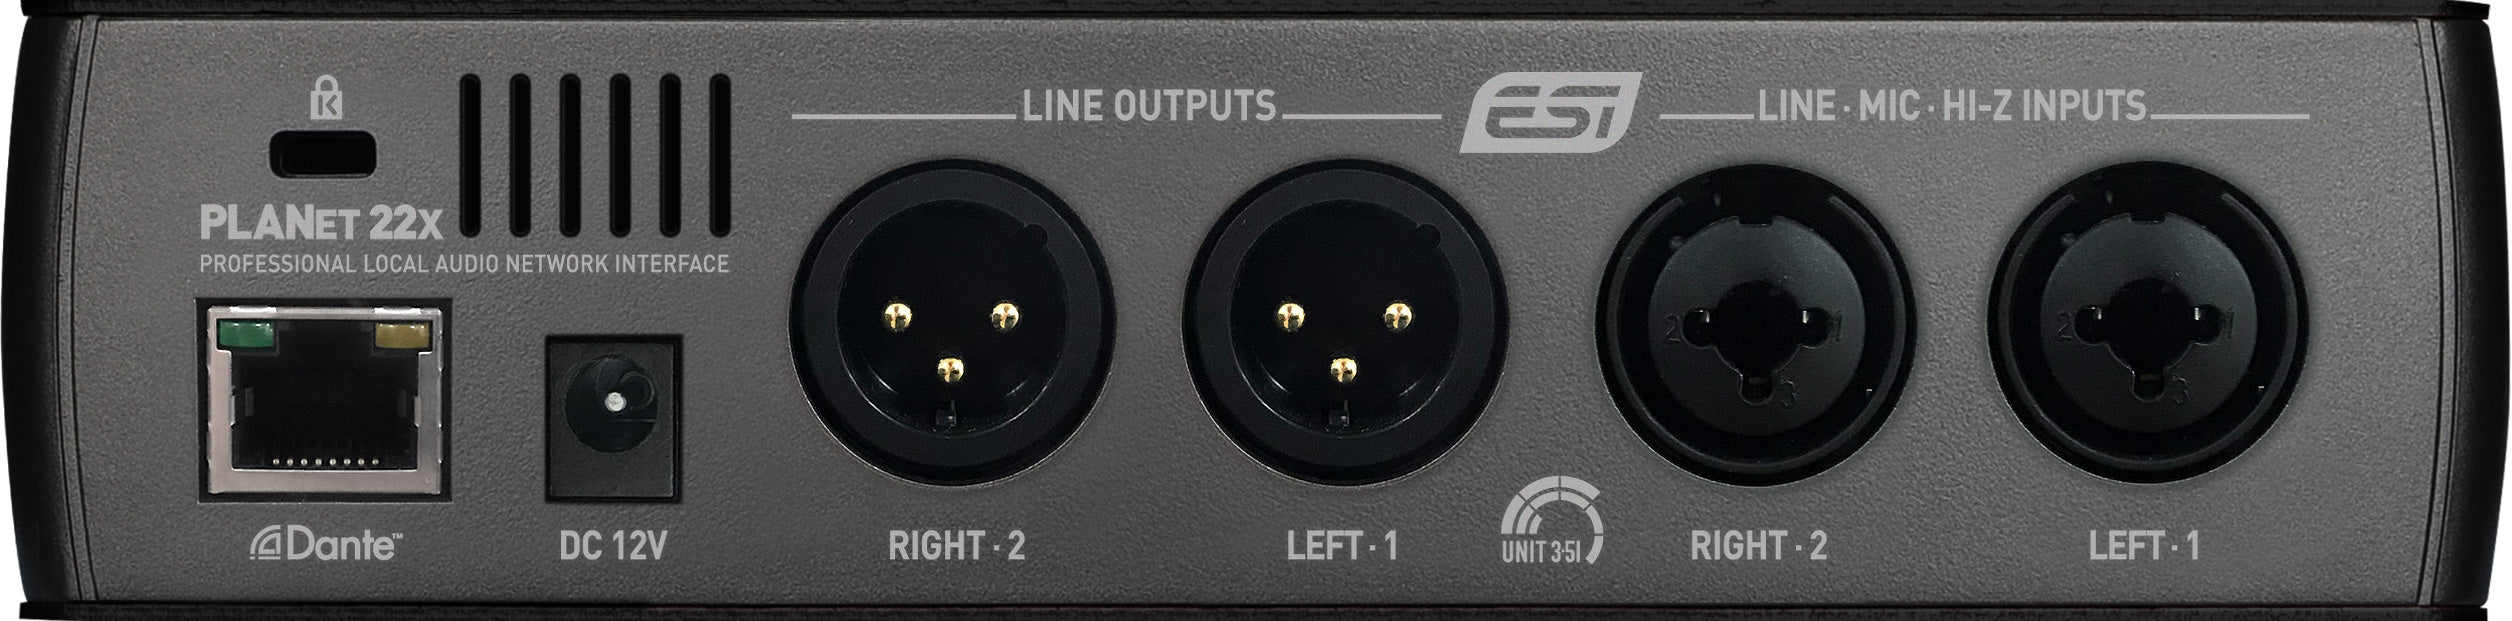 ESI Audio planet 22x - Professional Dante audio interface with 2 inputs / 2 outputs - Black